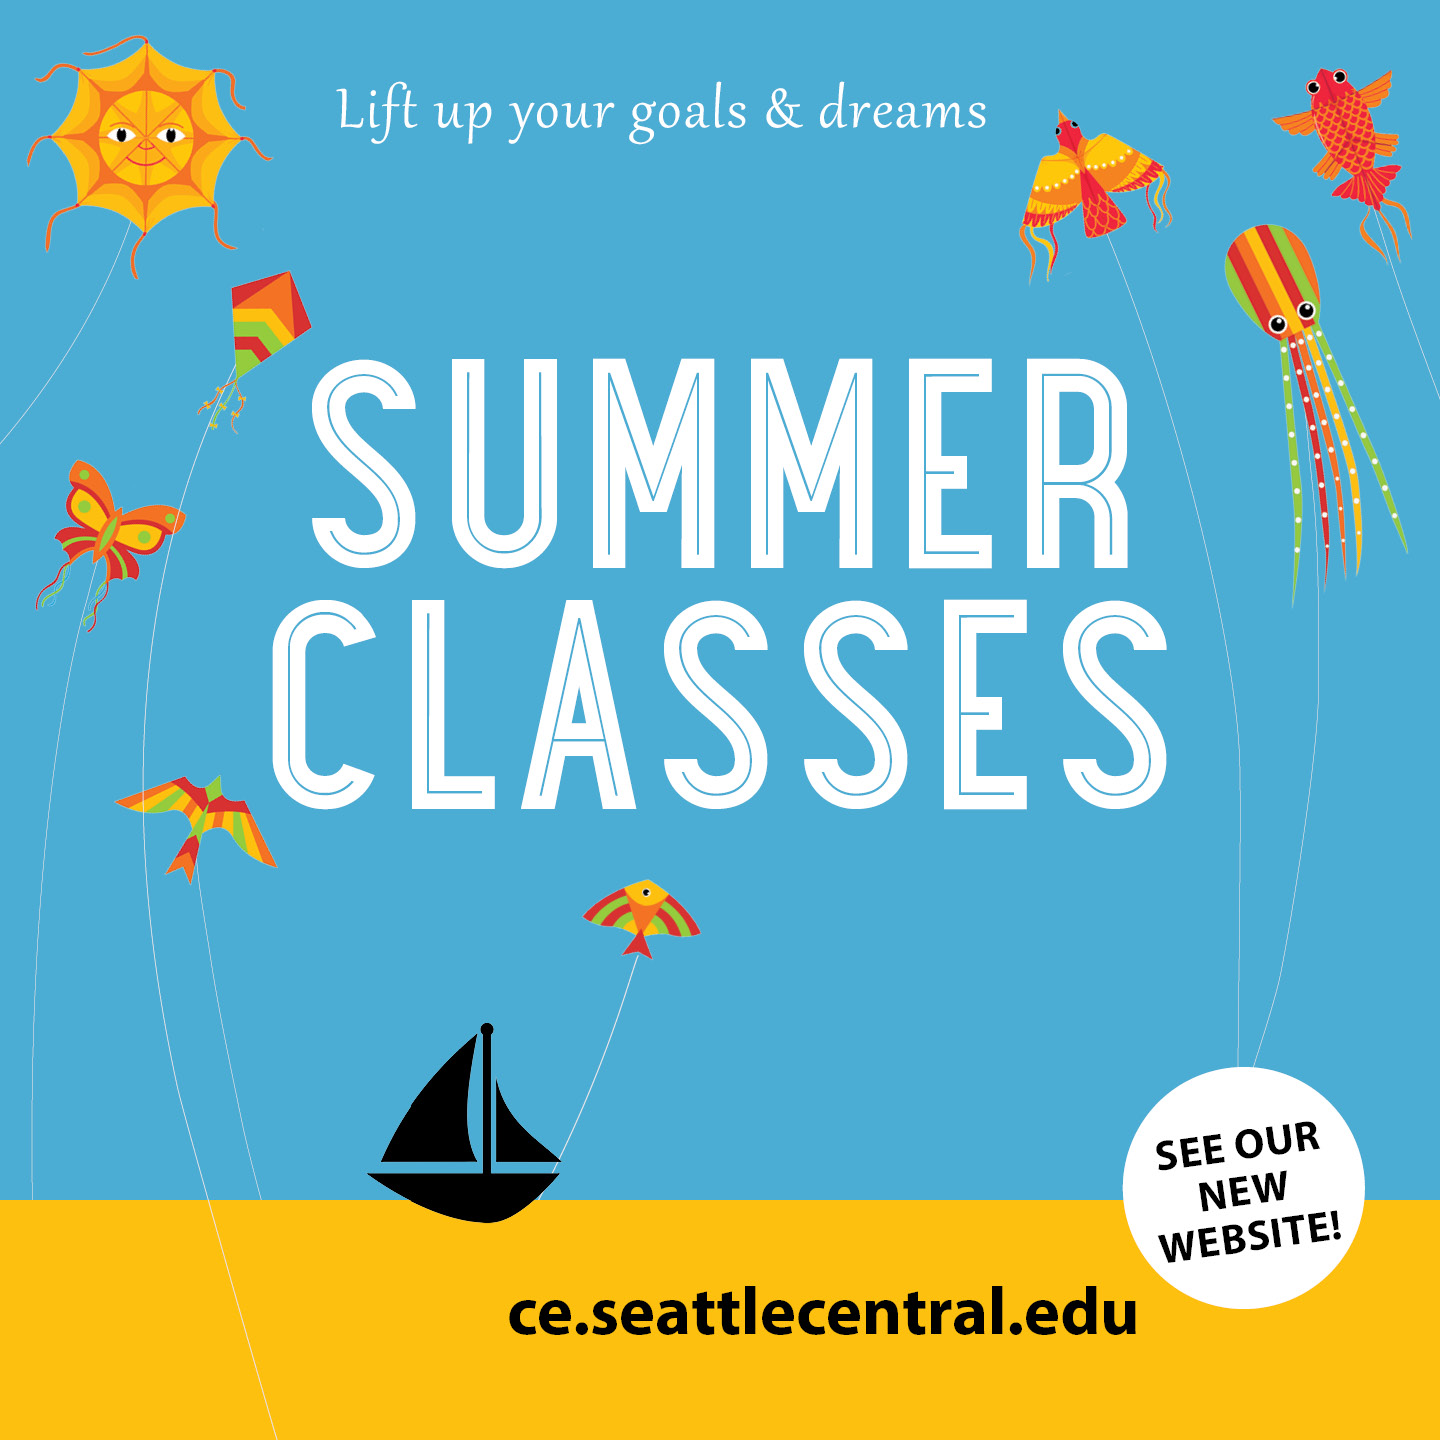 Summer Classes Square Image 2021 - Continuing Education at Seattle Central College